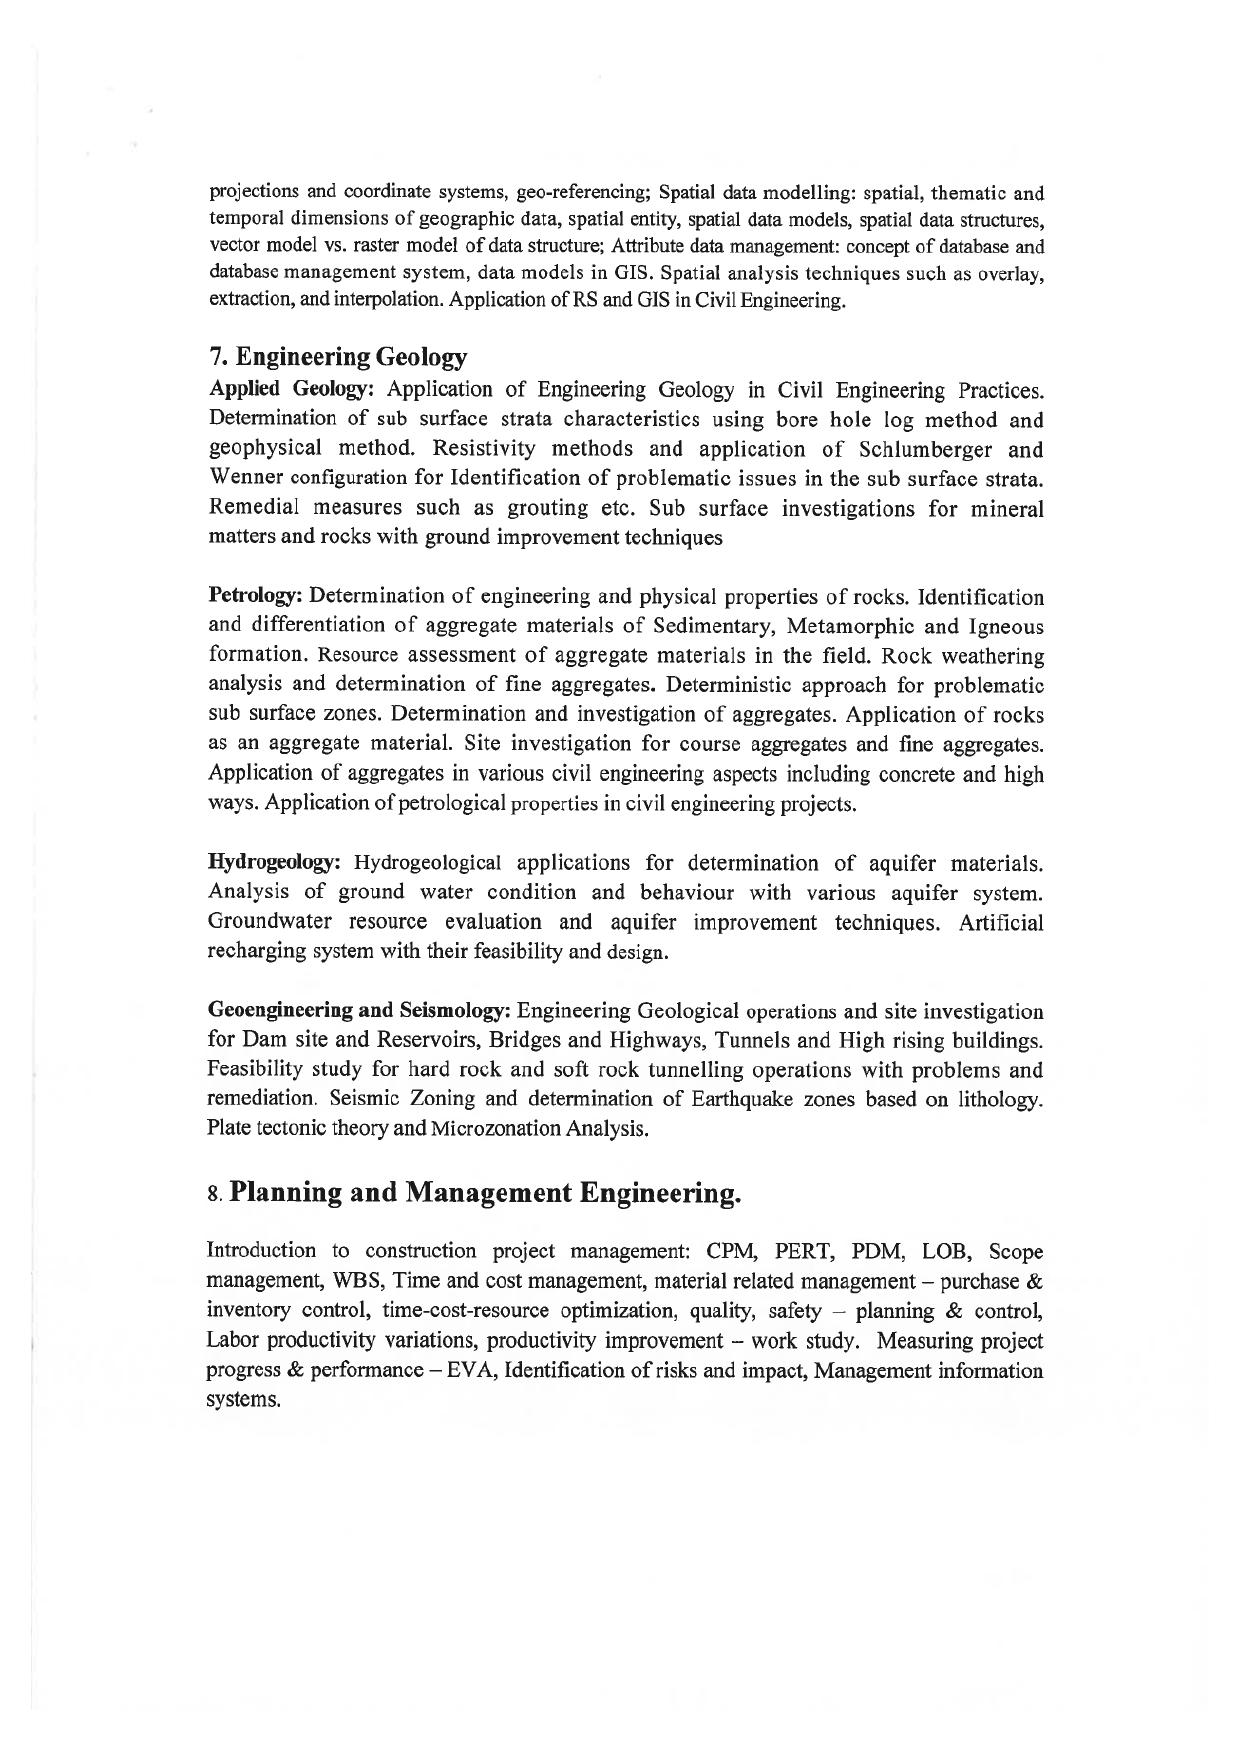 JMI Entrance Exam FACULTY OF ENGINEERING & TECHNOLOGY Syllabus - Page 10